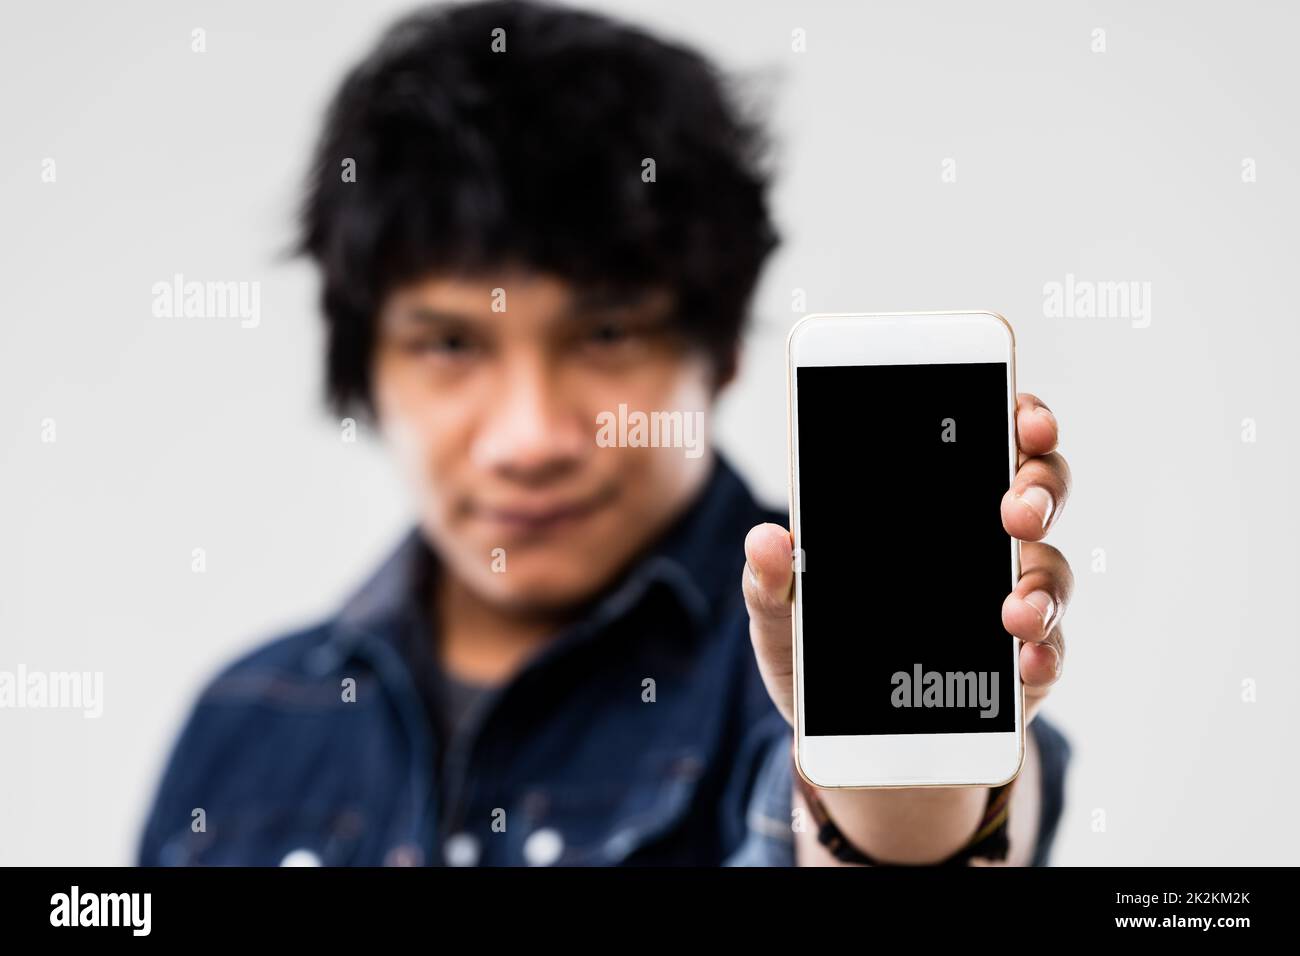 man showing smartphone screen to you Stock Photo